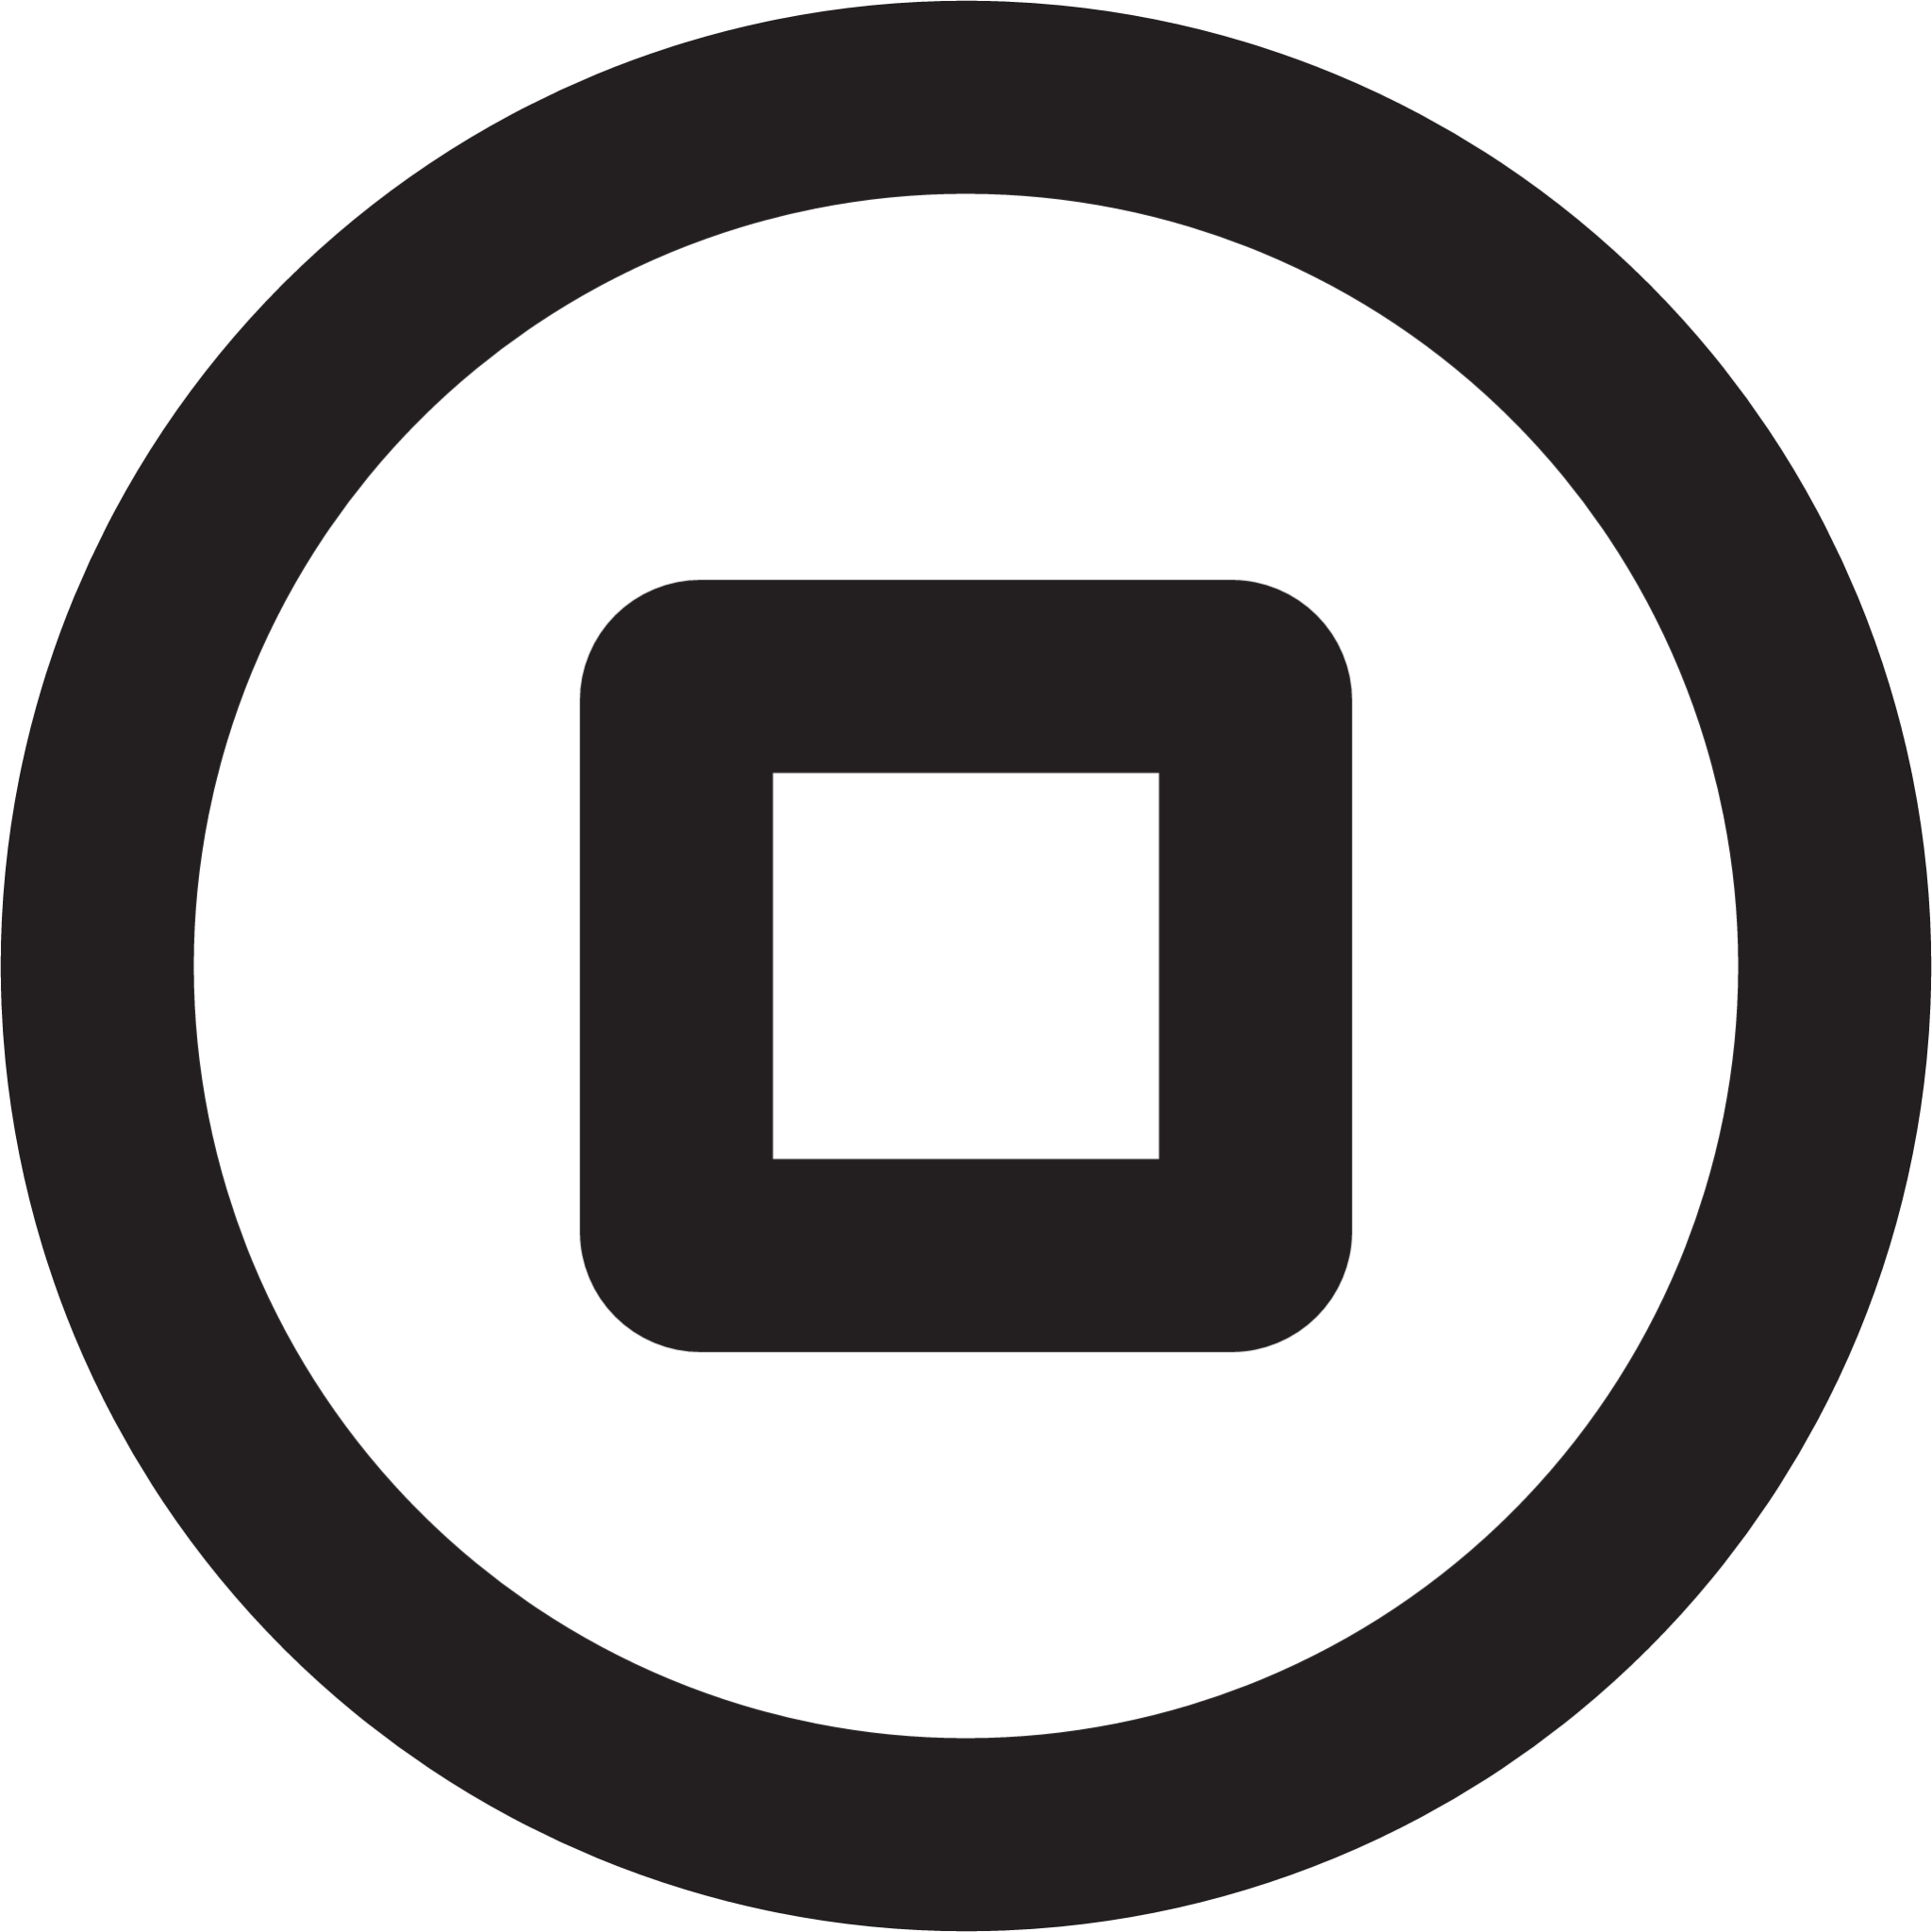 stop circle outline icon